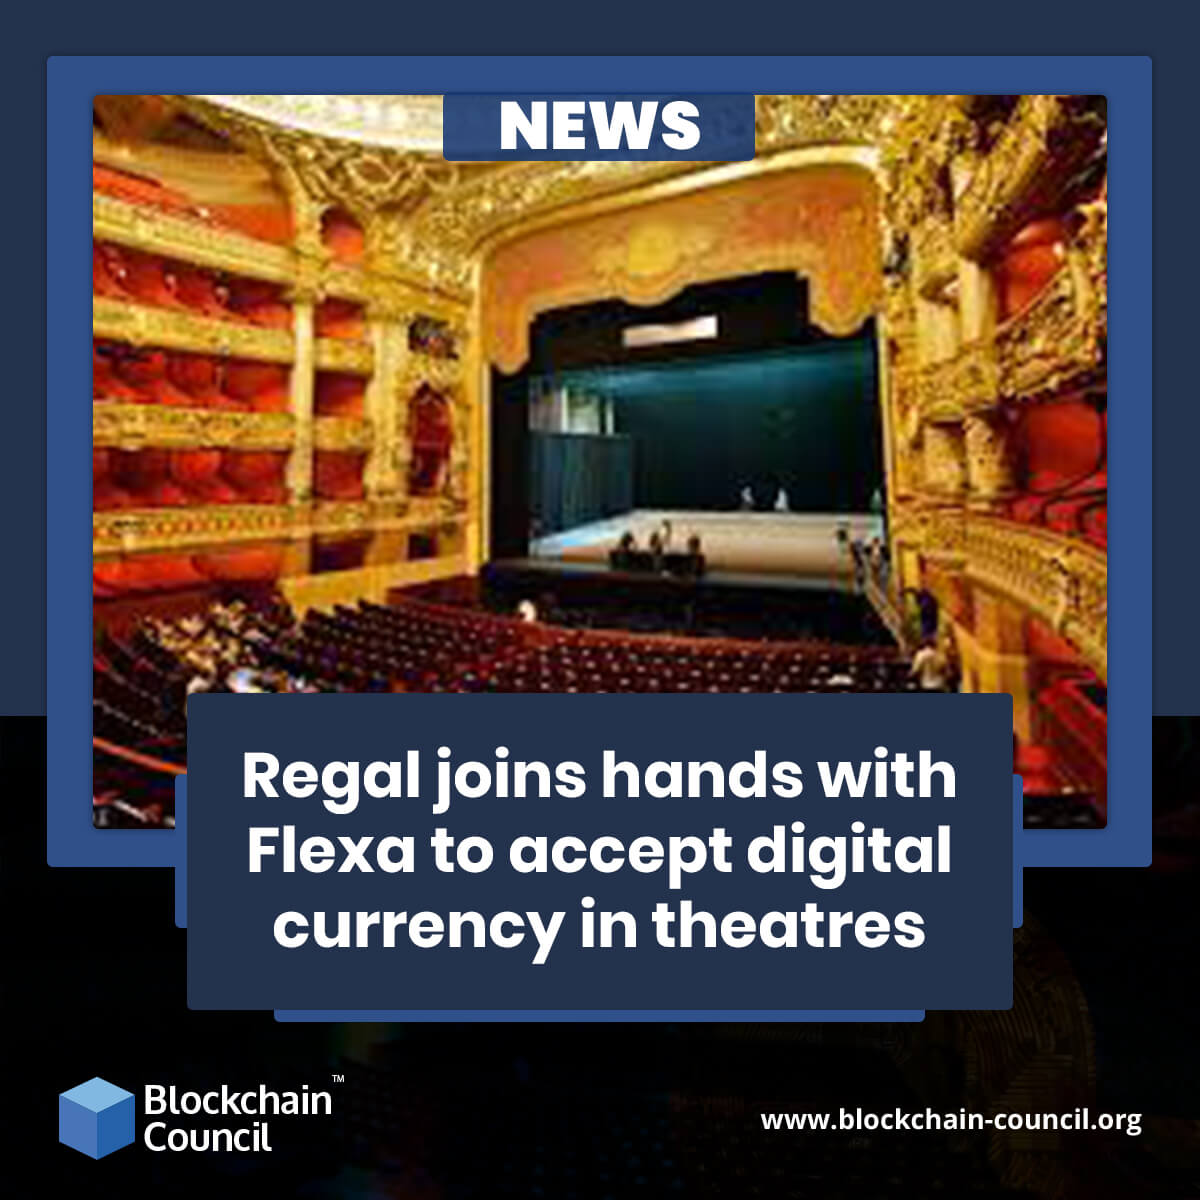 Regal joins hands with Flexa to accept digital currency in theatres